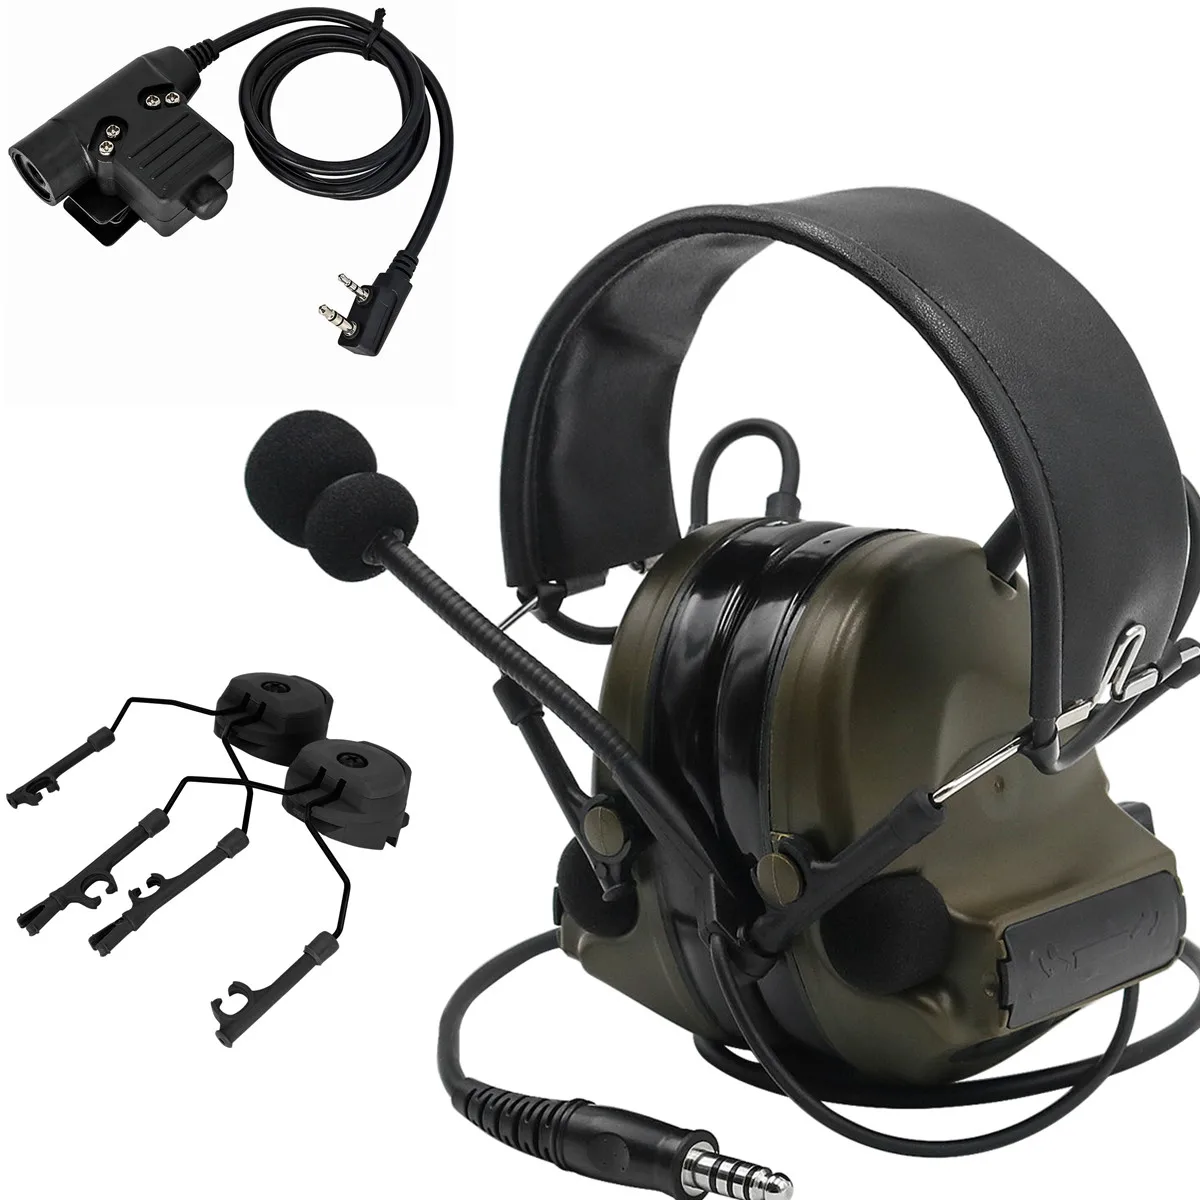 

COMTAC II Tactical Headset Electronic Earmuffs Hearing Protection Airsoft Shooting Headset & ARC Rail Adapter & Tactical U94 Ptt